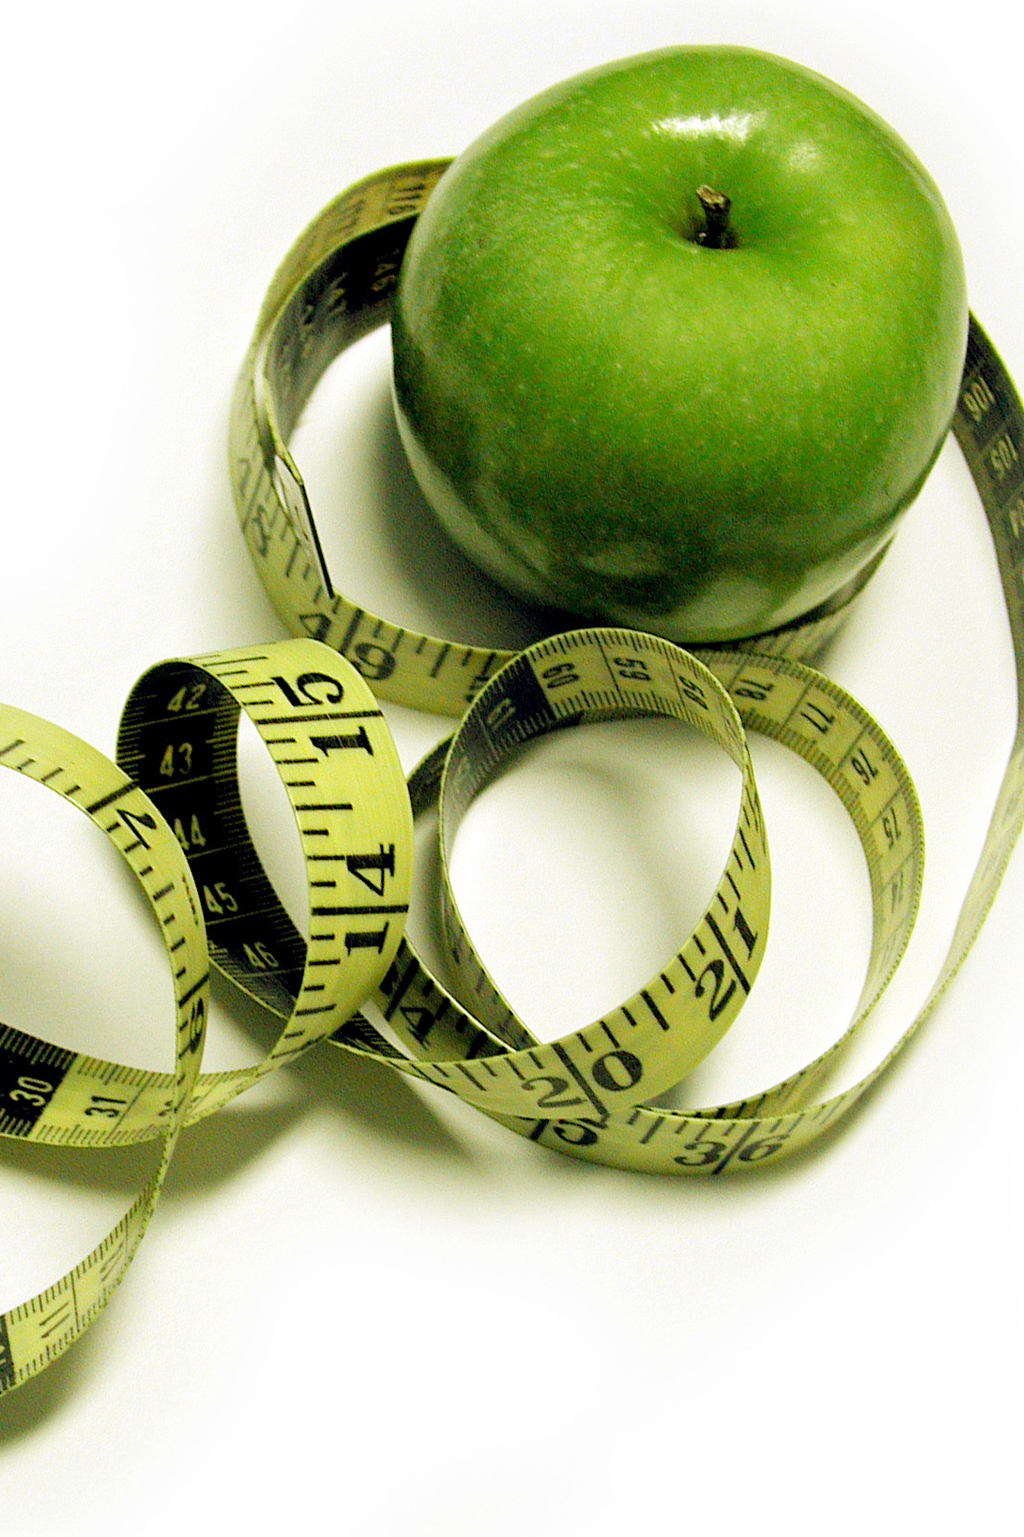 Green apple with curling tape measure